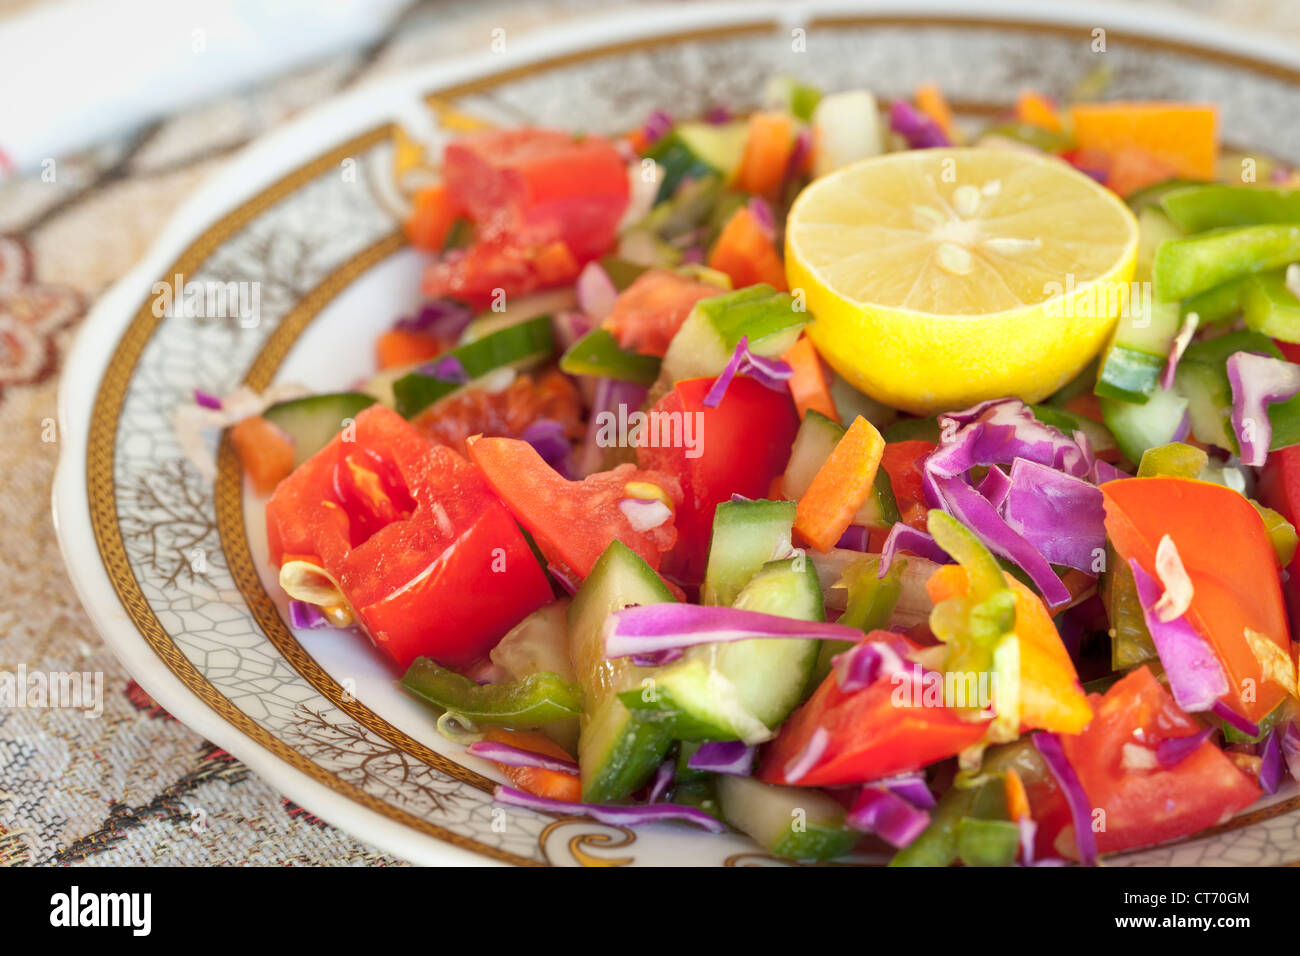 Plate of mixed salad, Egypt Stock Photo